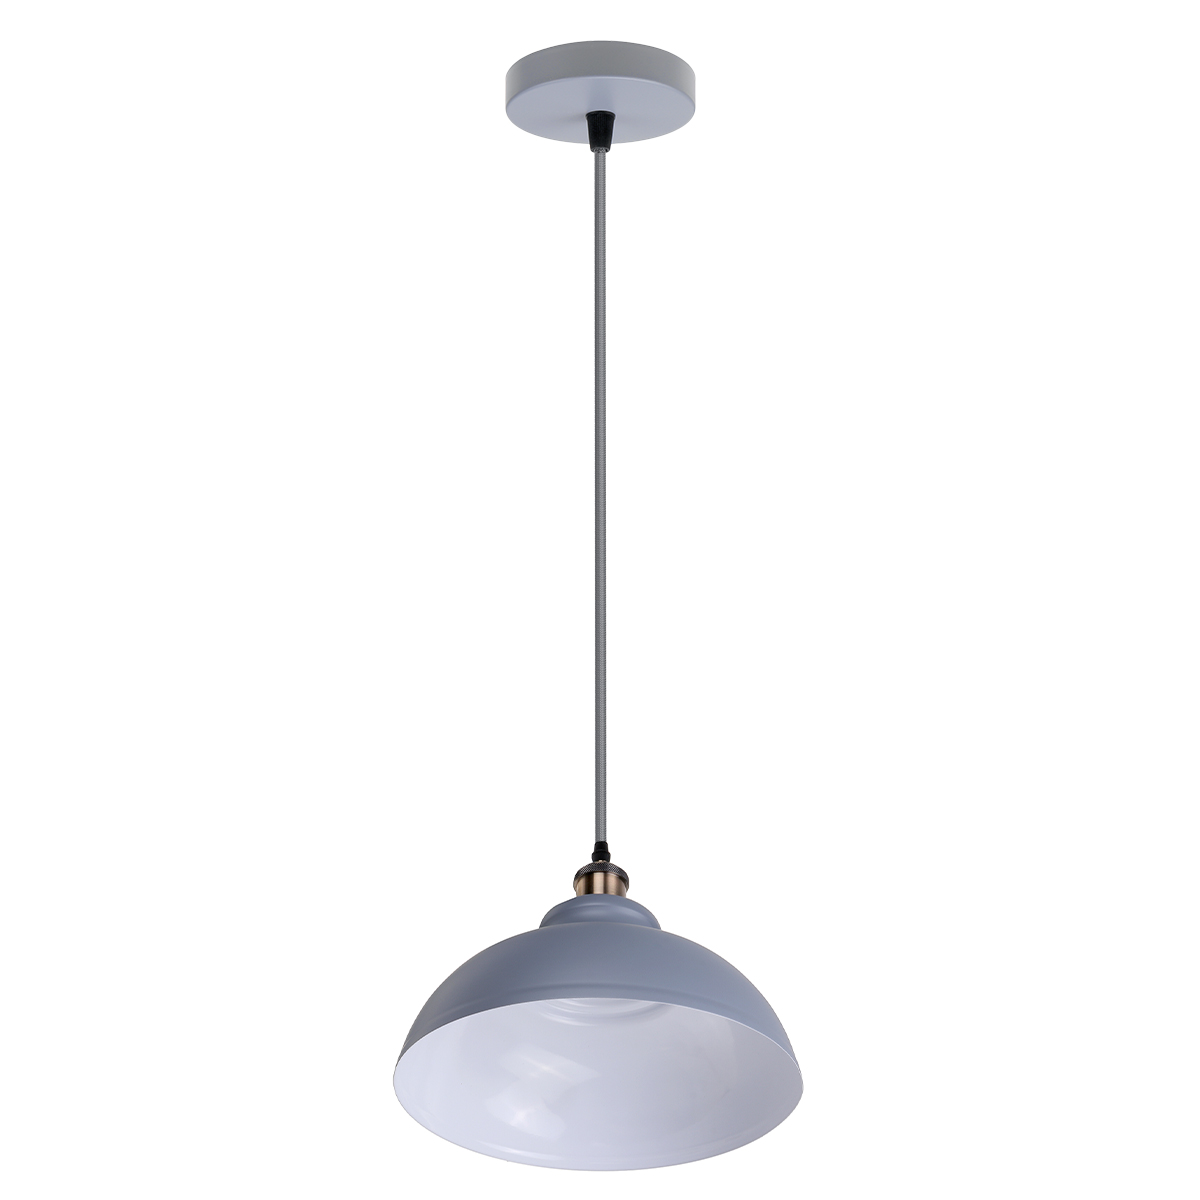 Retro-Metal-Pendant-Lampshade-Ceiling-Light-Shade-Modern-Industrial-Kitchen-Bar-Table-Chandelier-1795919-2